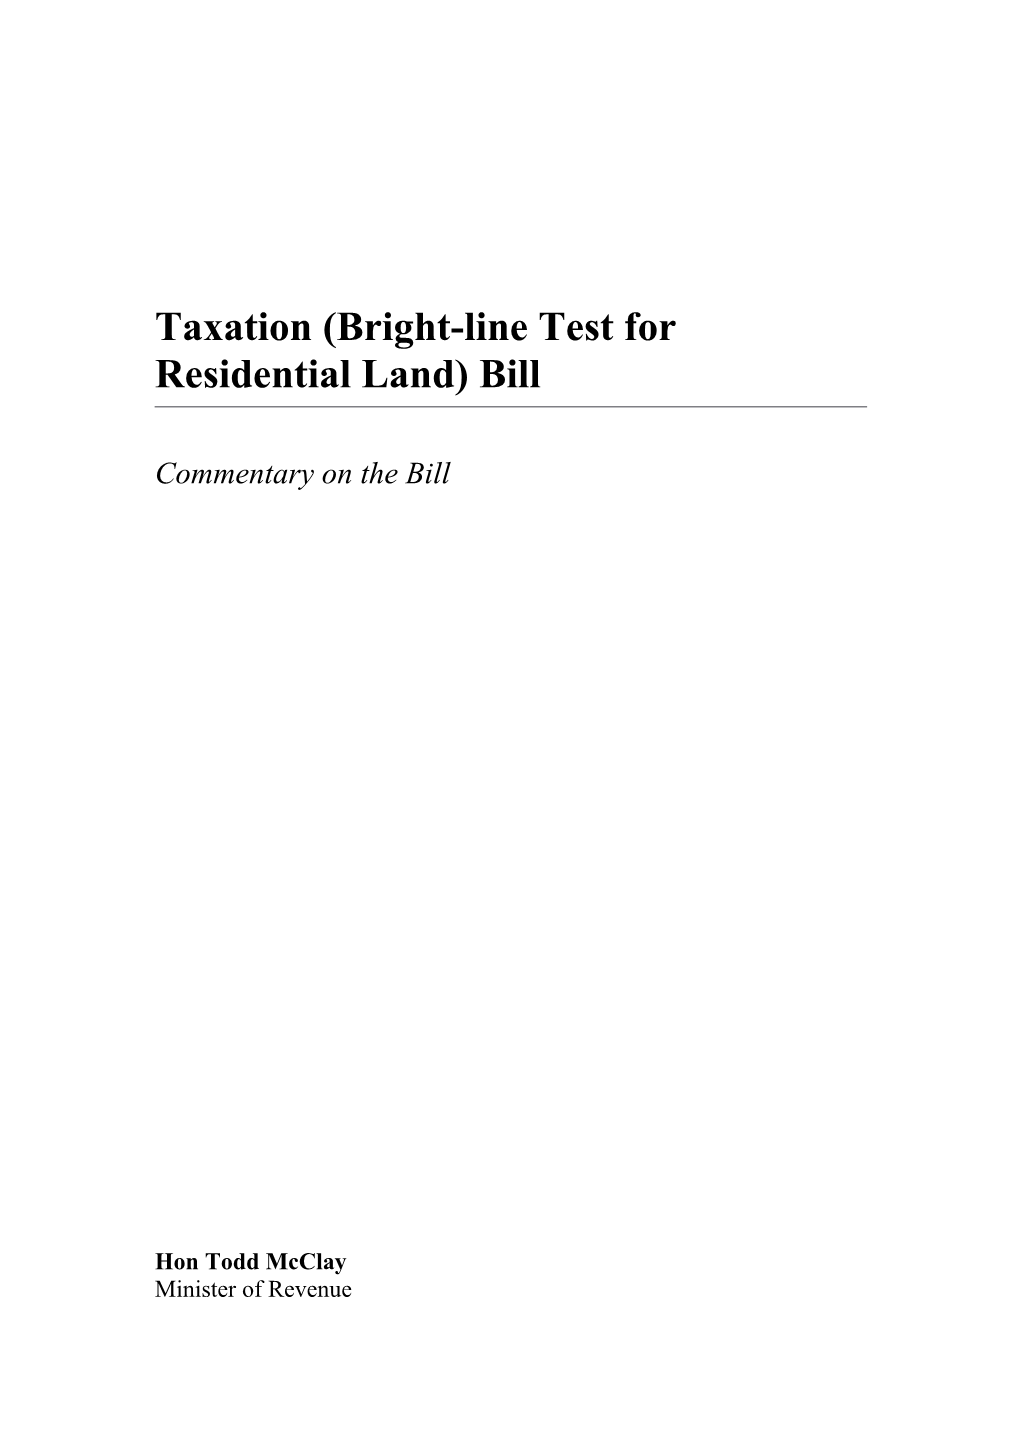 Taxation (Bright-Line Test for Residential Land) Bill - Commentary on the Bill